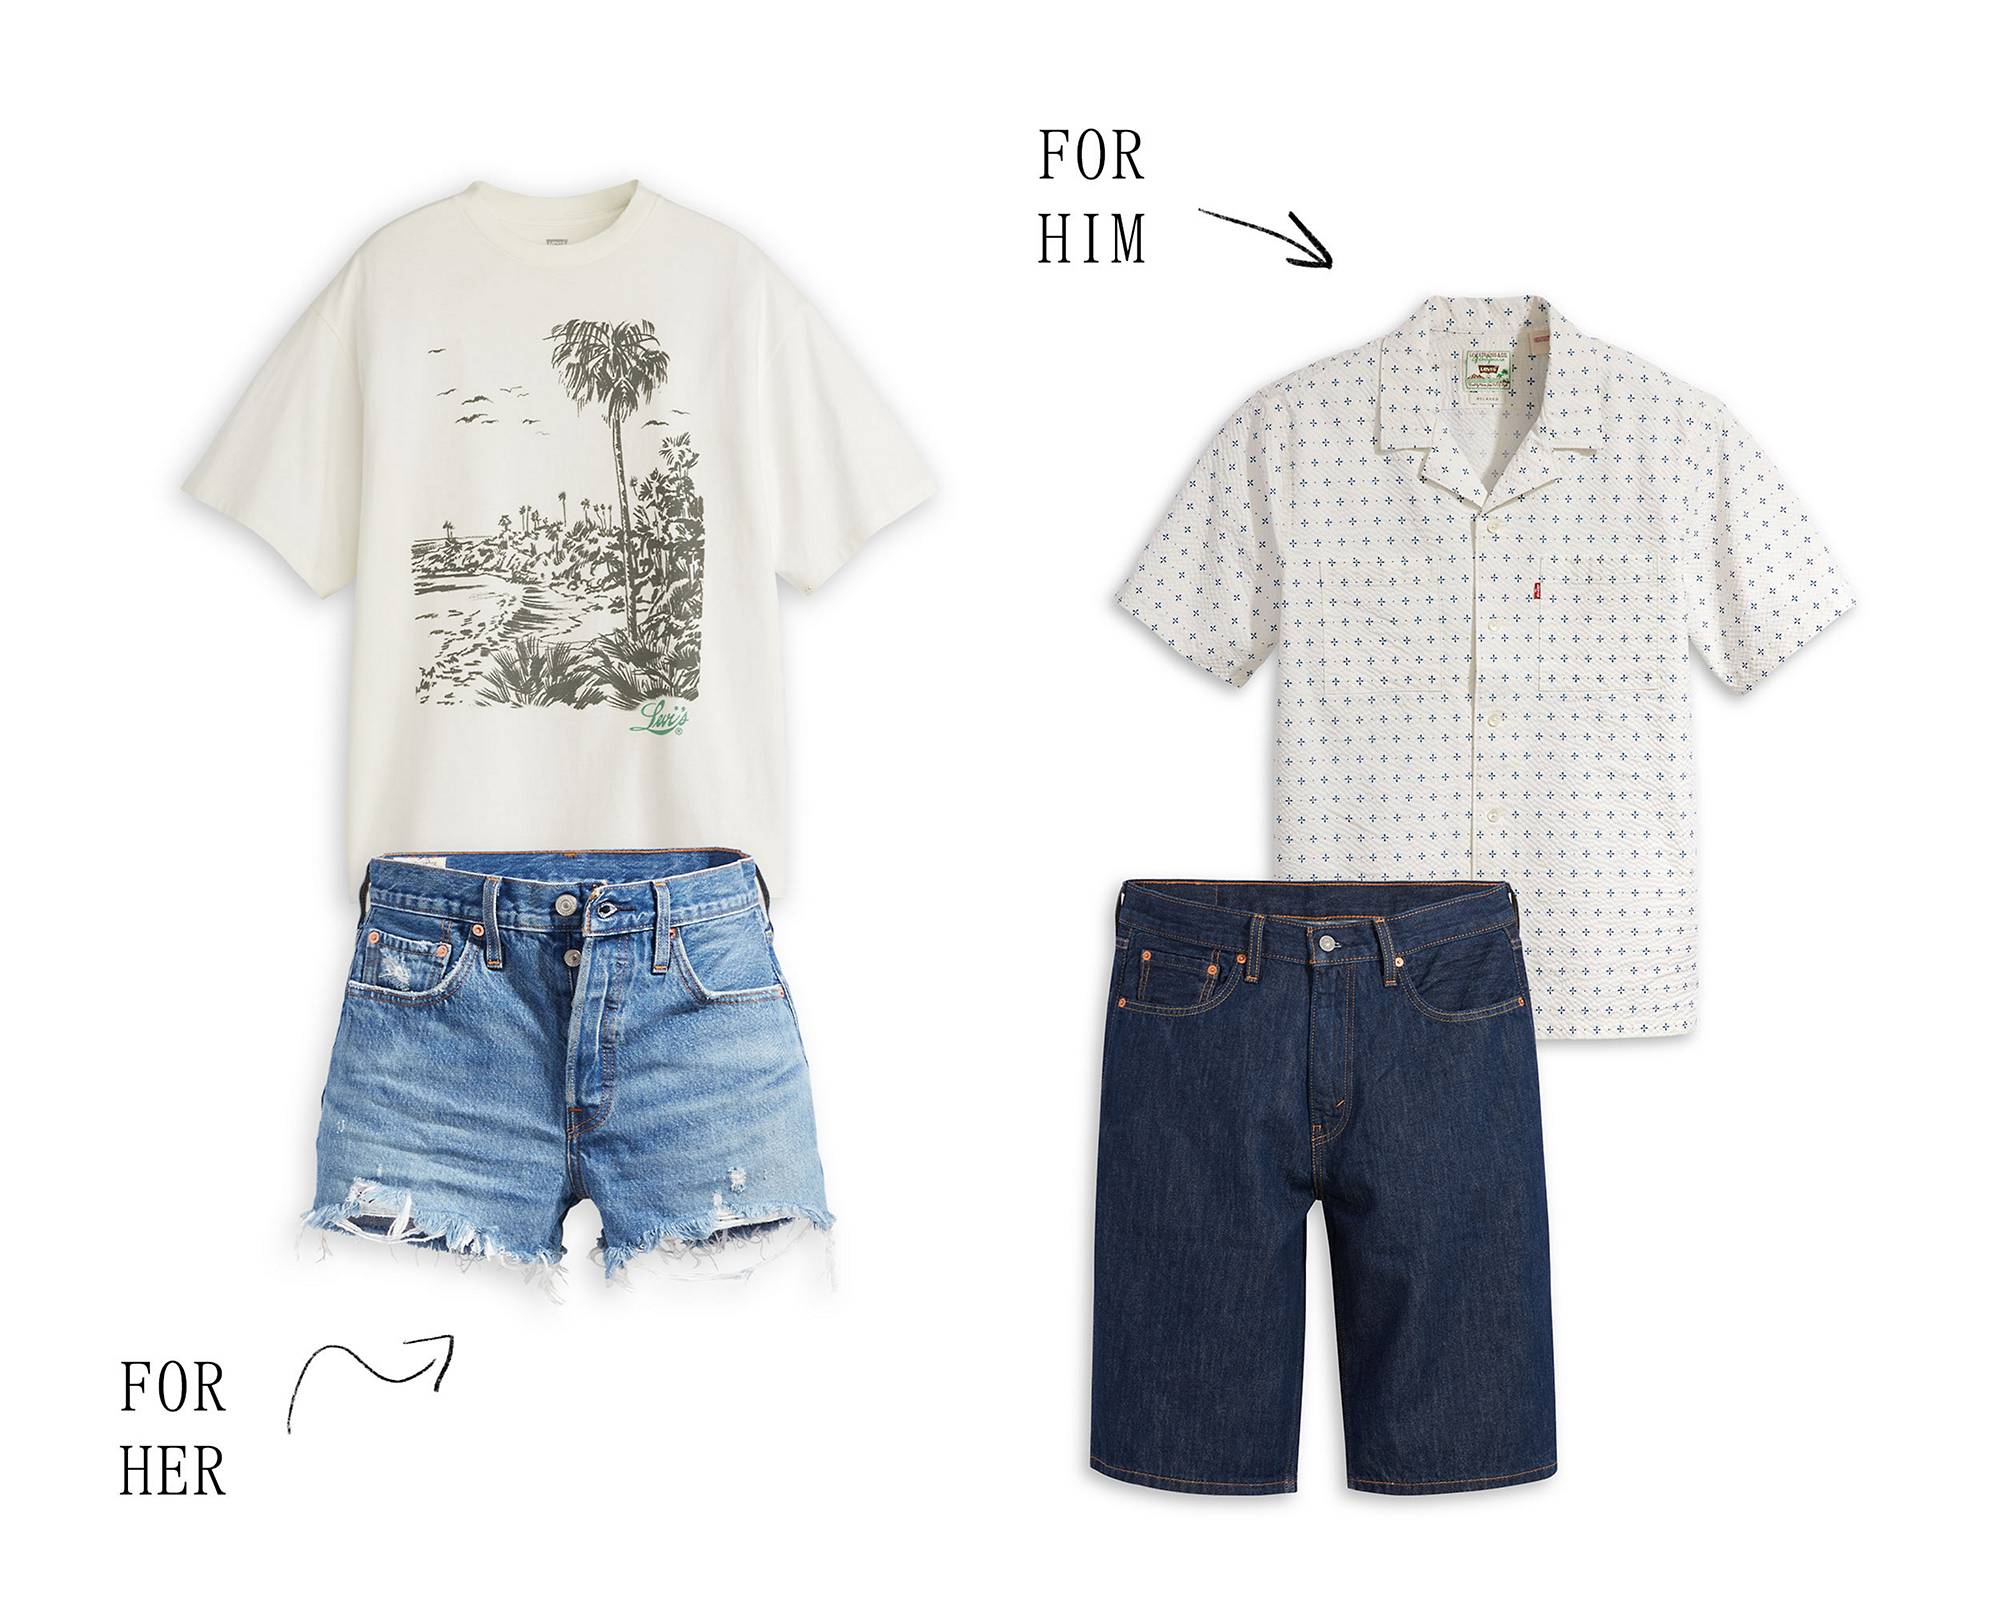 Flat lay outfit styling for the beach